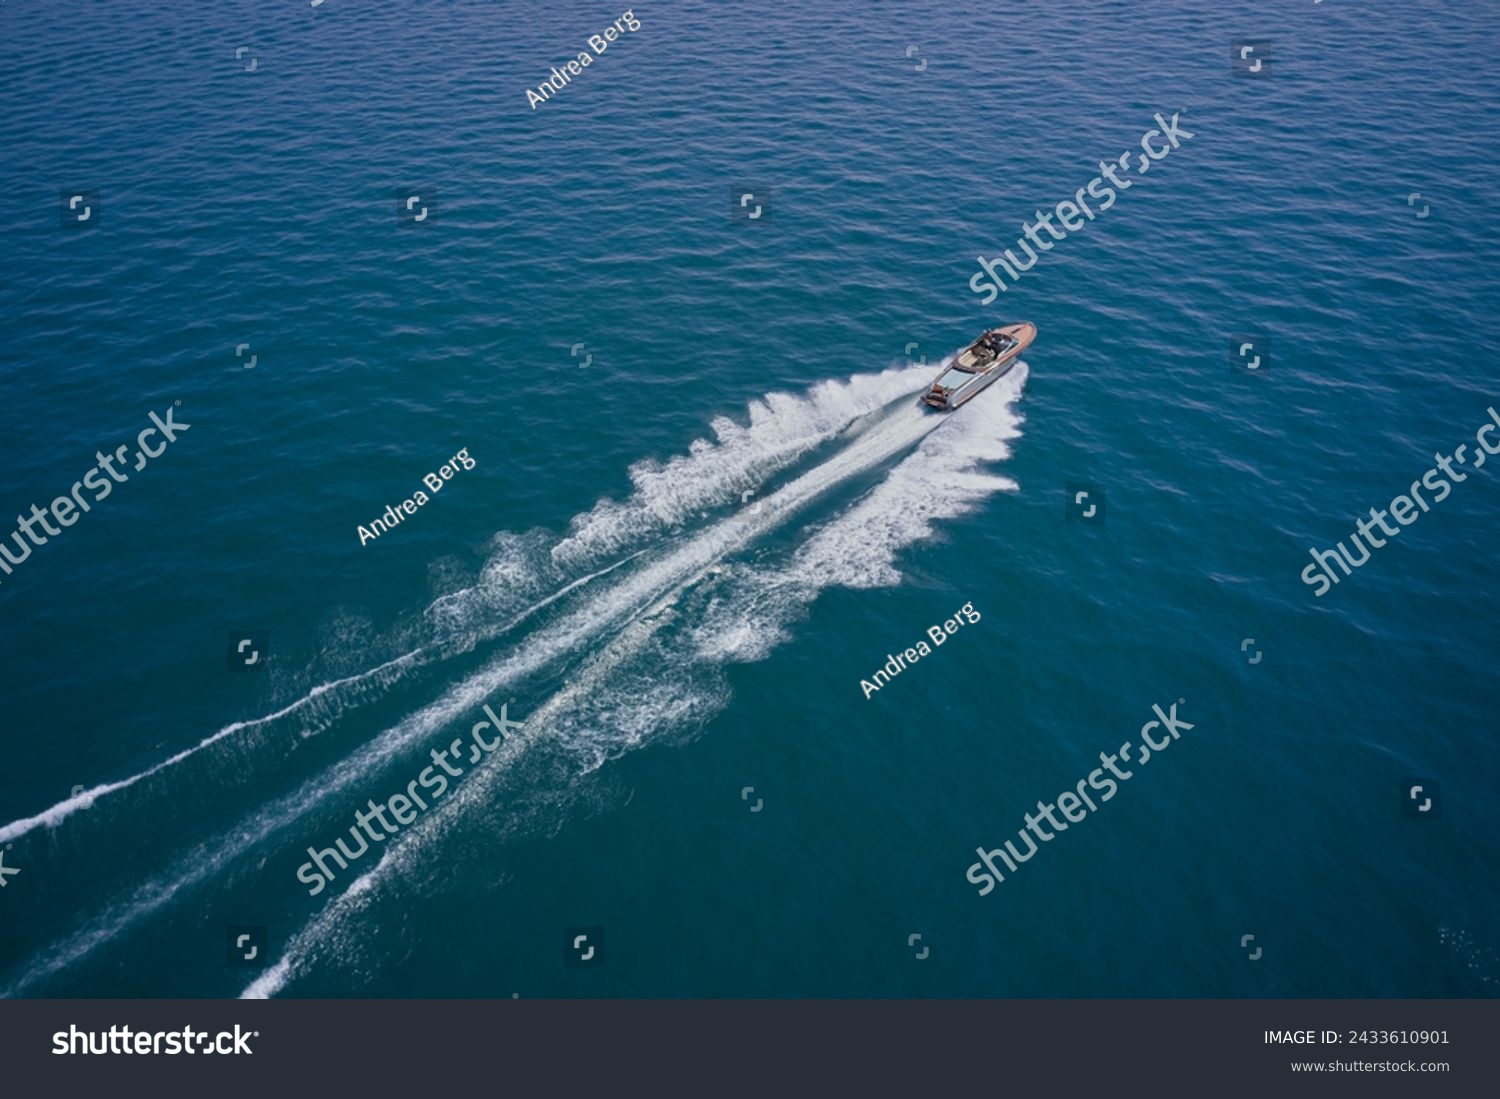 A large modern high-speed wooden luxury boat moves on blue water, top view. Expensive wooden boat, man and woman in motion on the water making a white trail looking like air. #2433610901